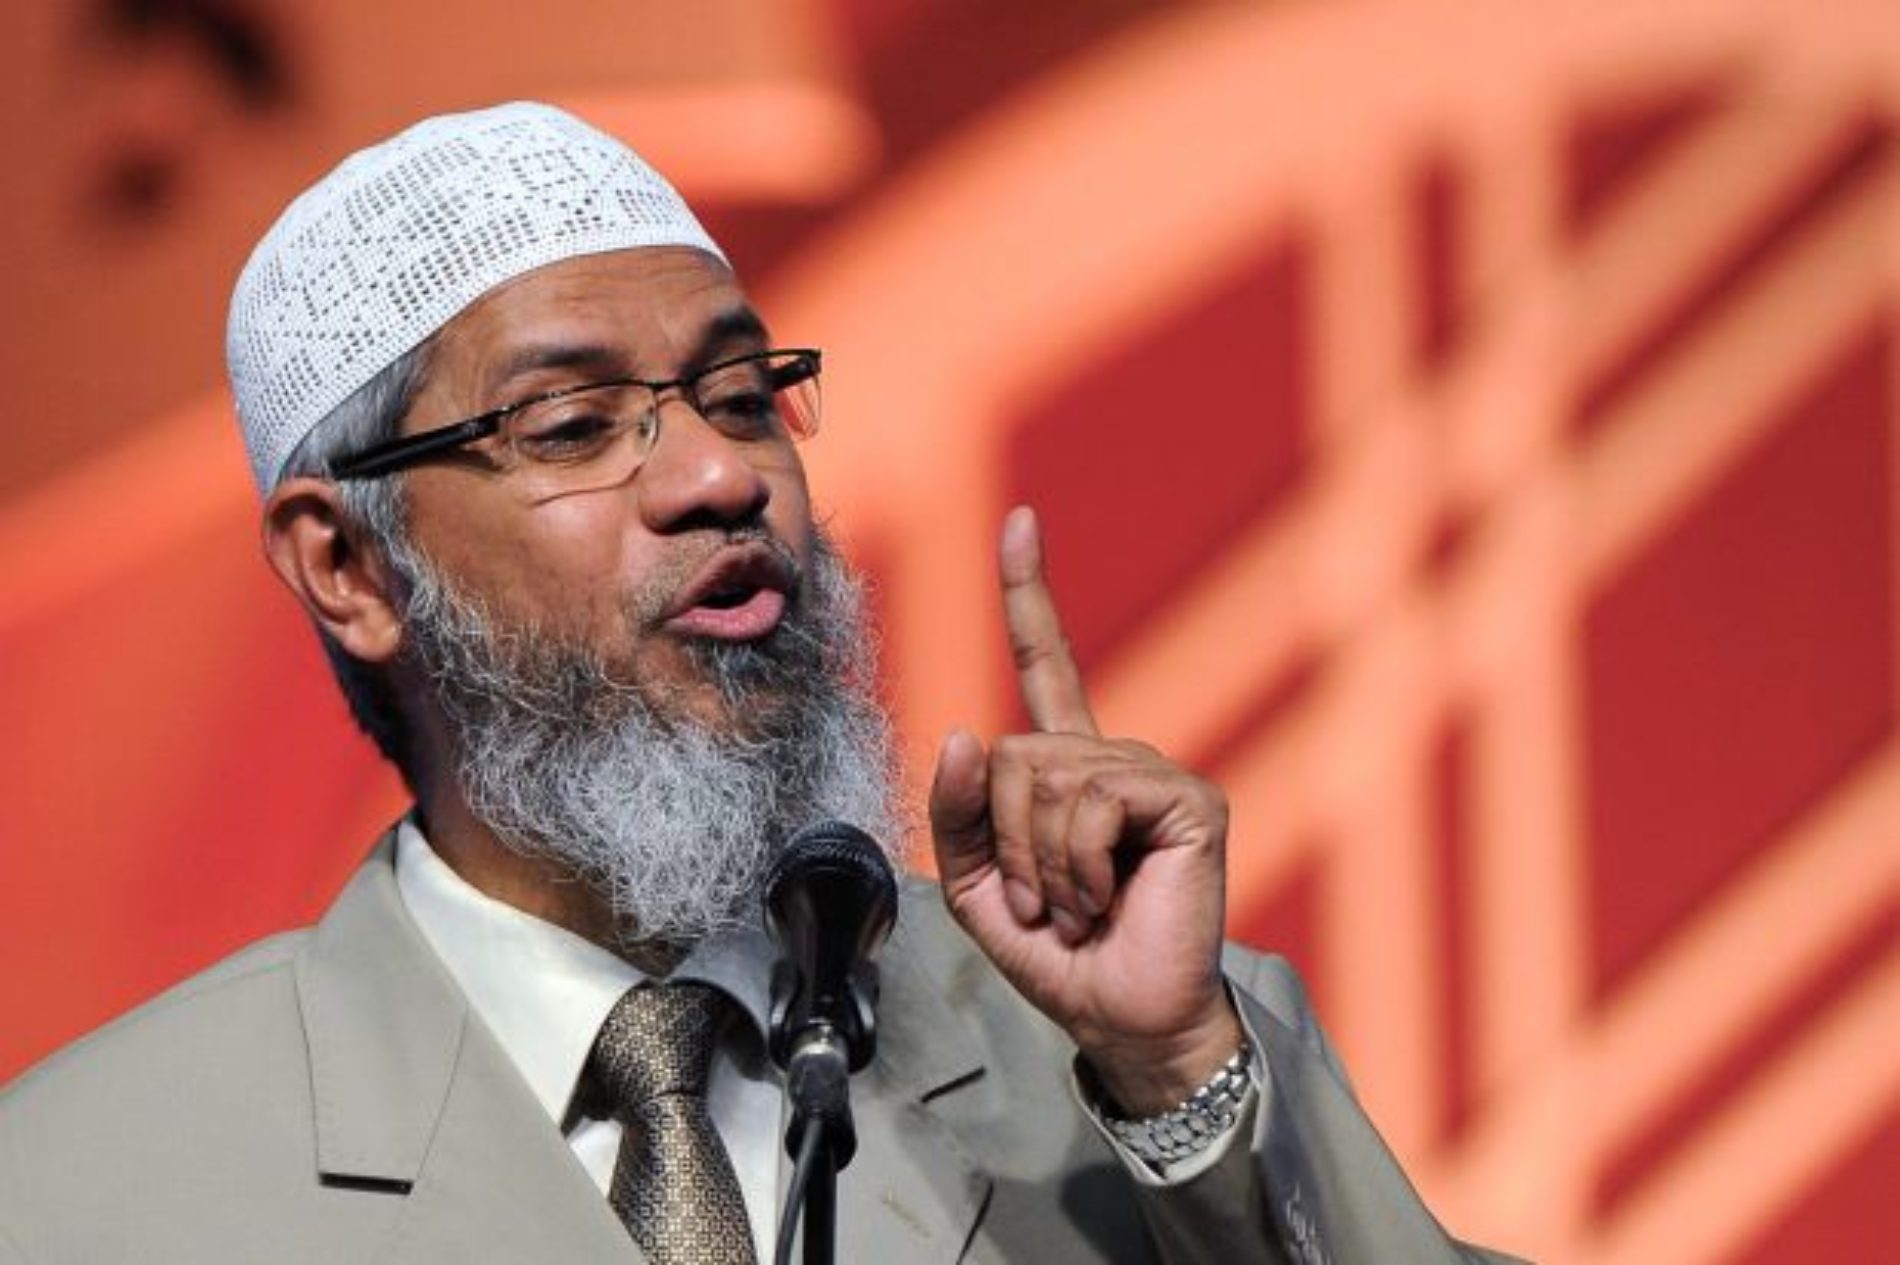 Muslim Televangelist Zakir Naik Says People Become Gay Because They Have Sex With Too Many Women